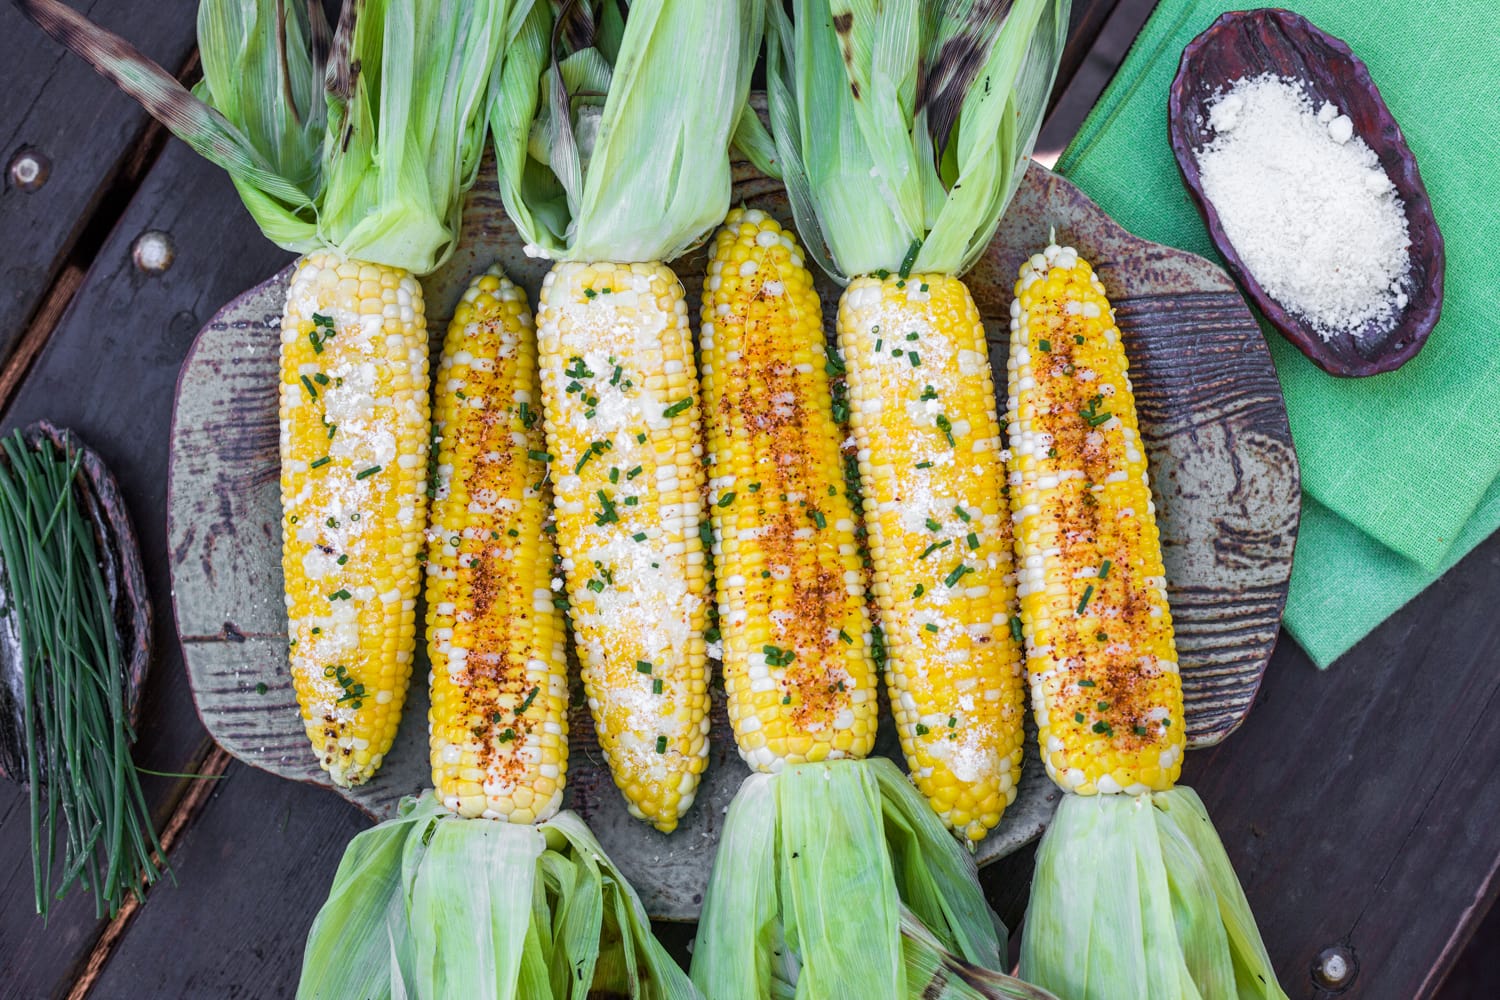 A platter of grilled corn on the cob topped with a variety of ingredients